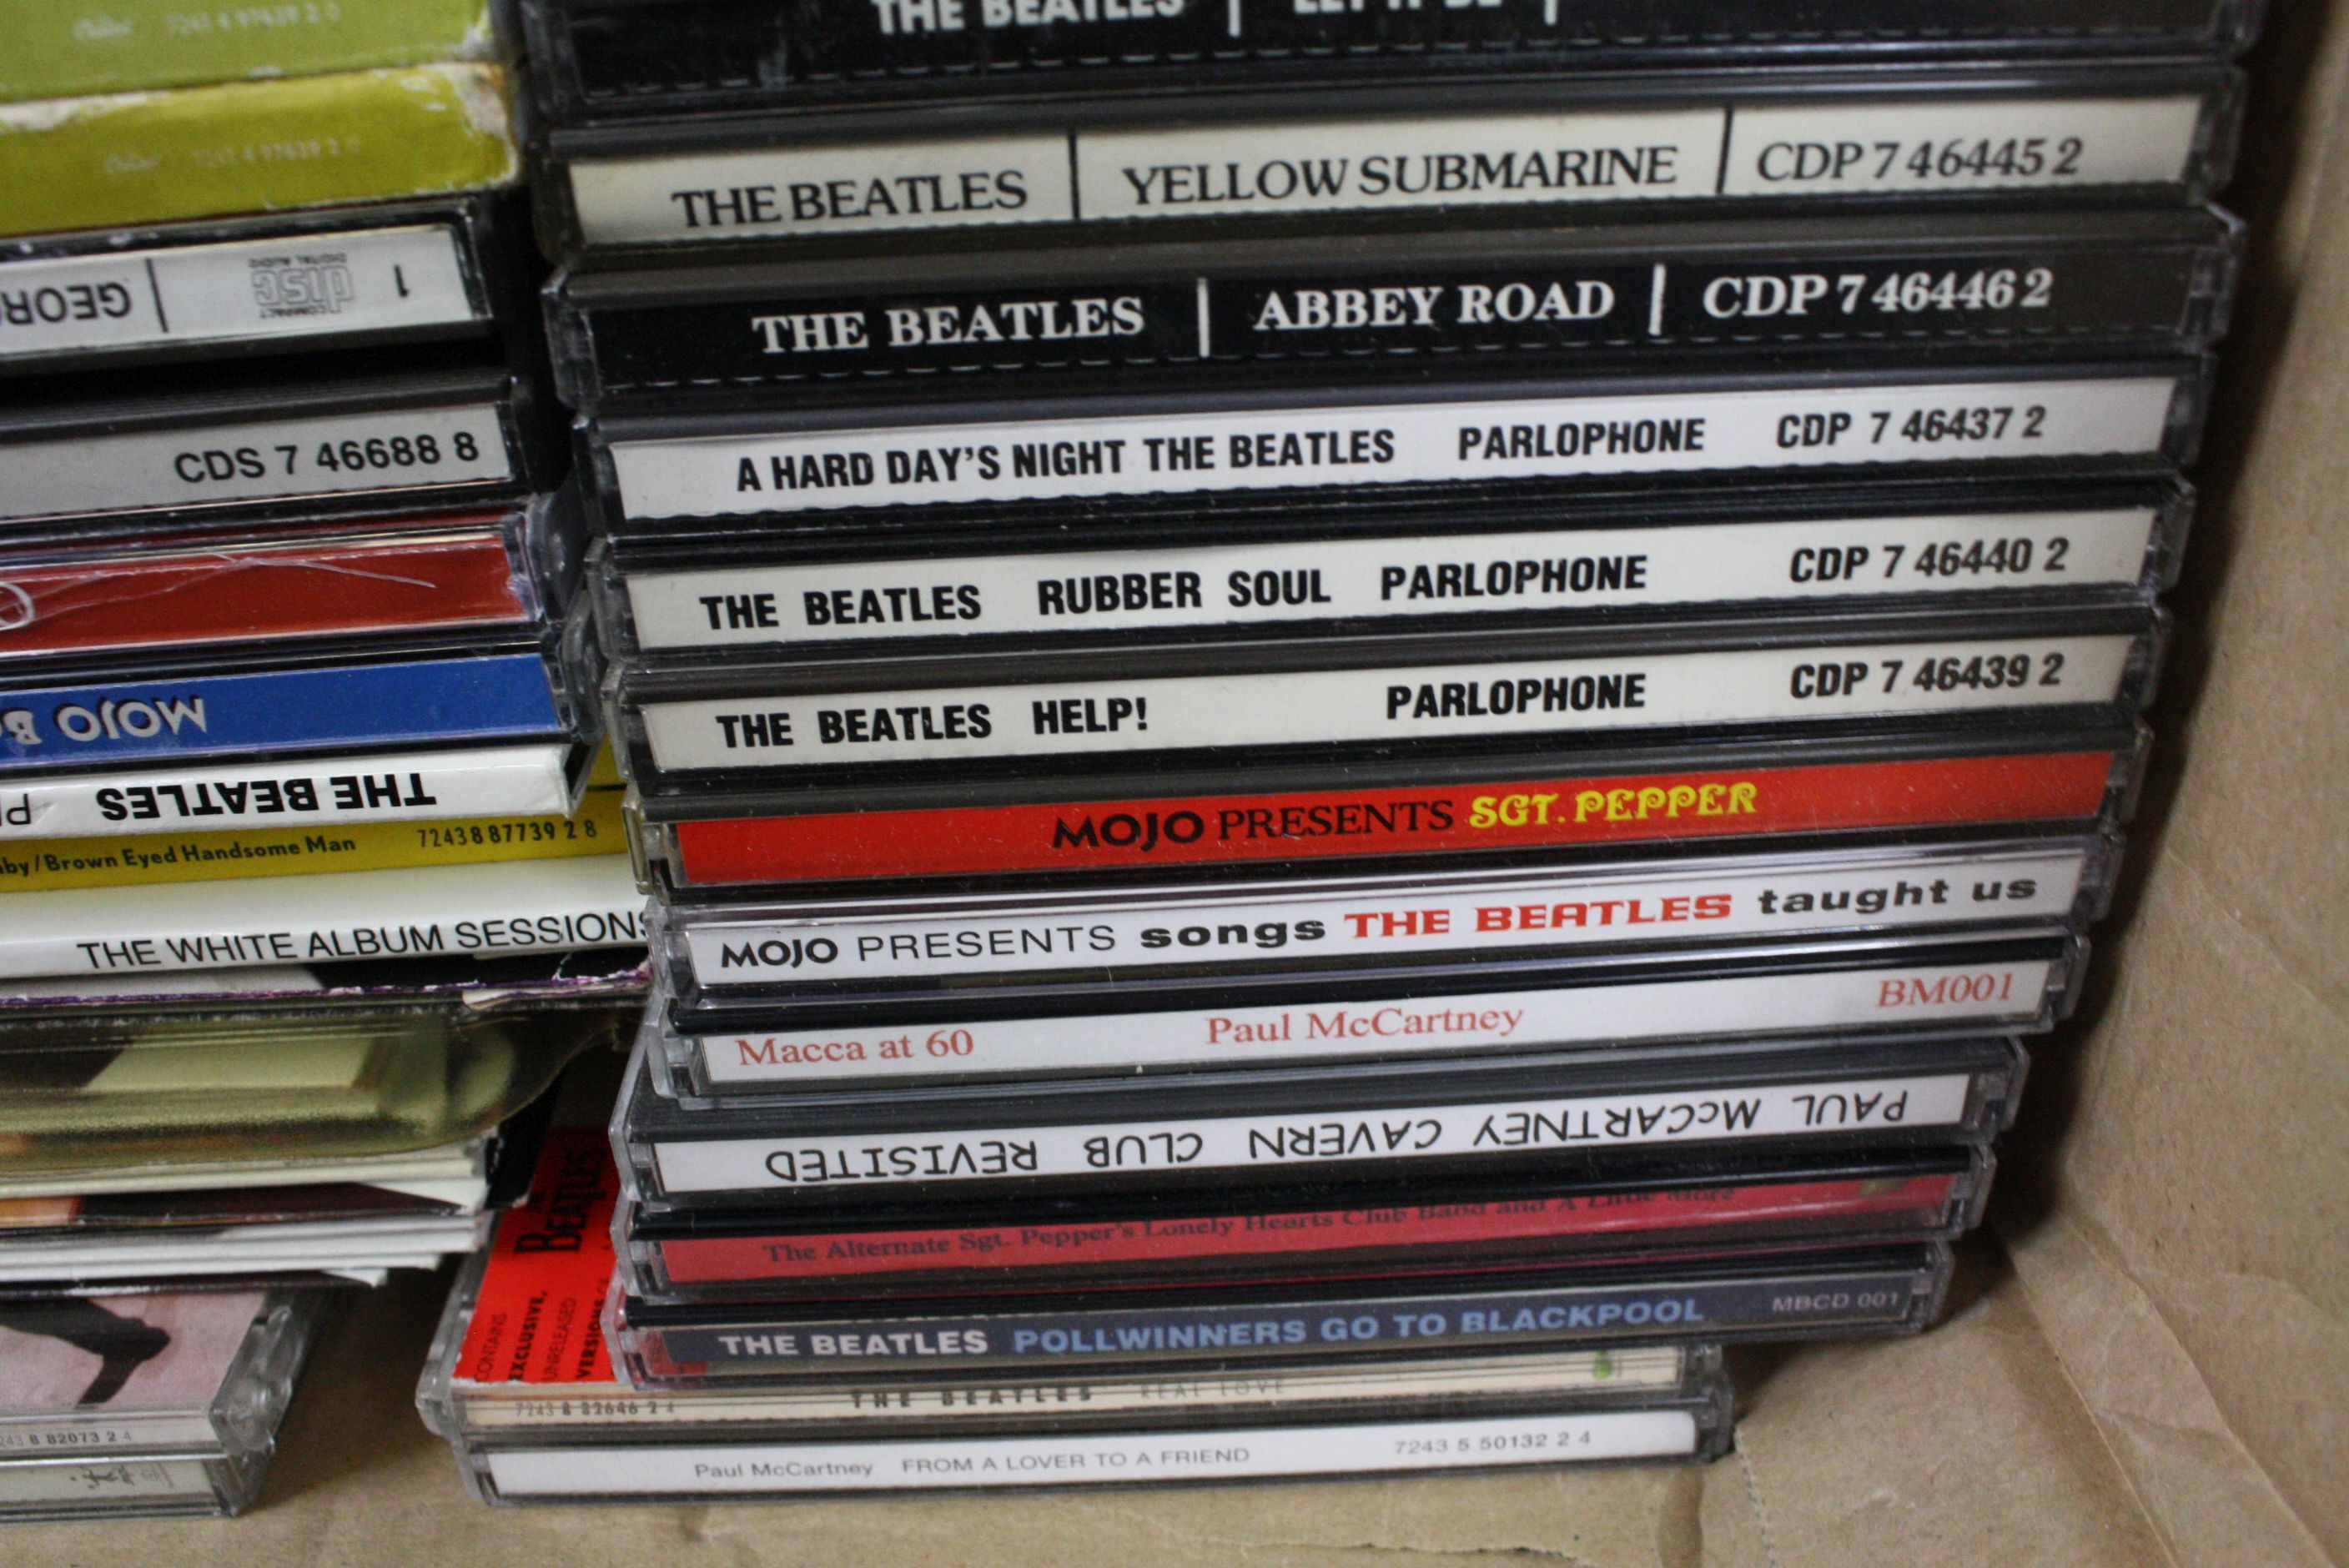 CDs - Over 150 Beatles and related CD's including imports, box sets, singles, giveaways, private - Image 18 of 18